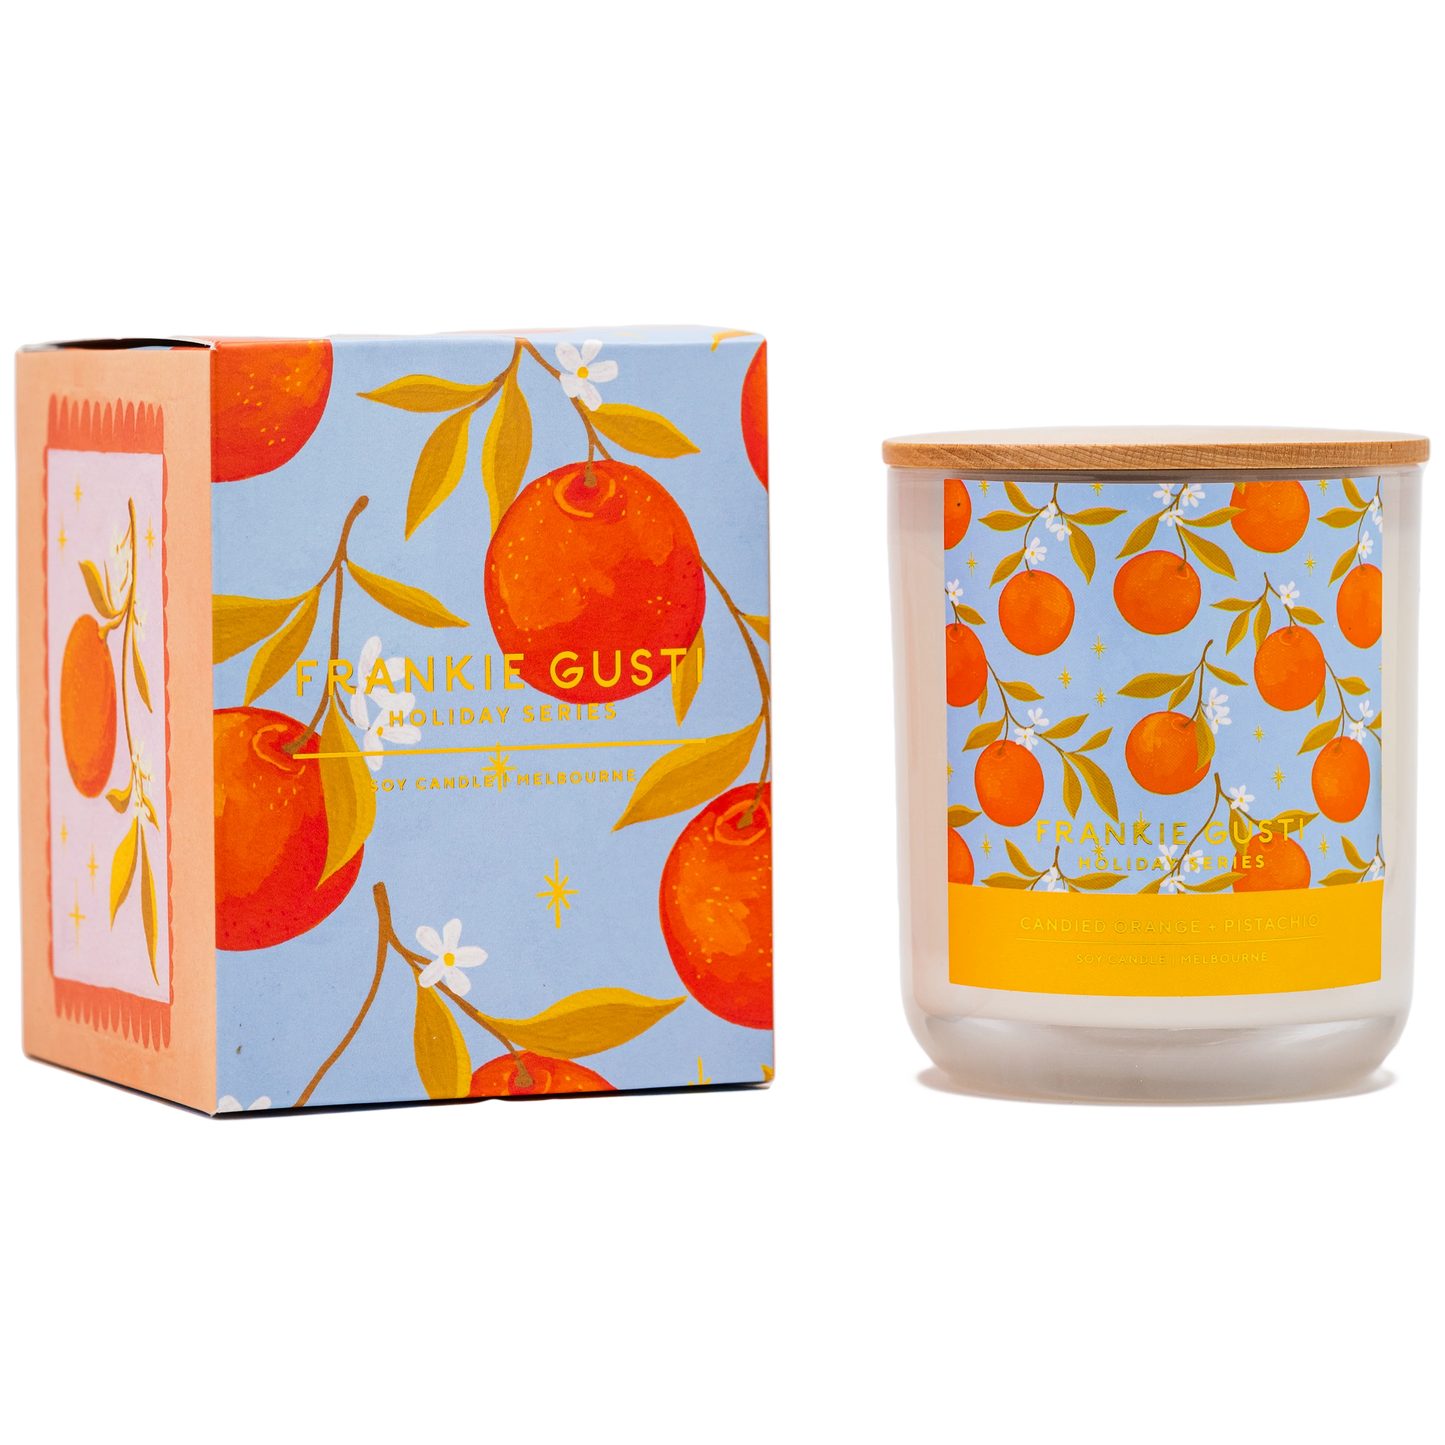 Frankie Gusti - Holiday Series Candle